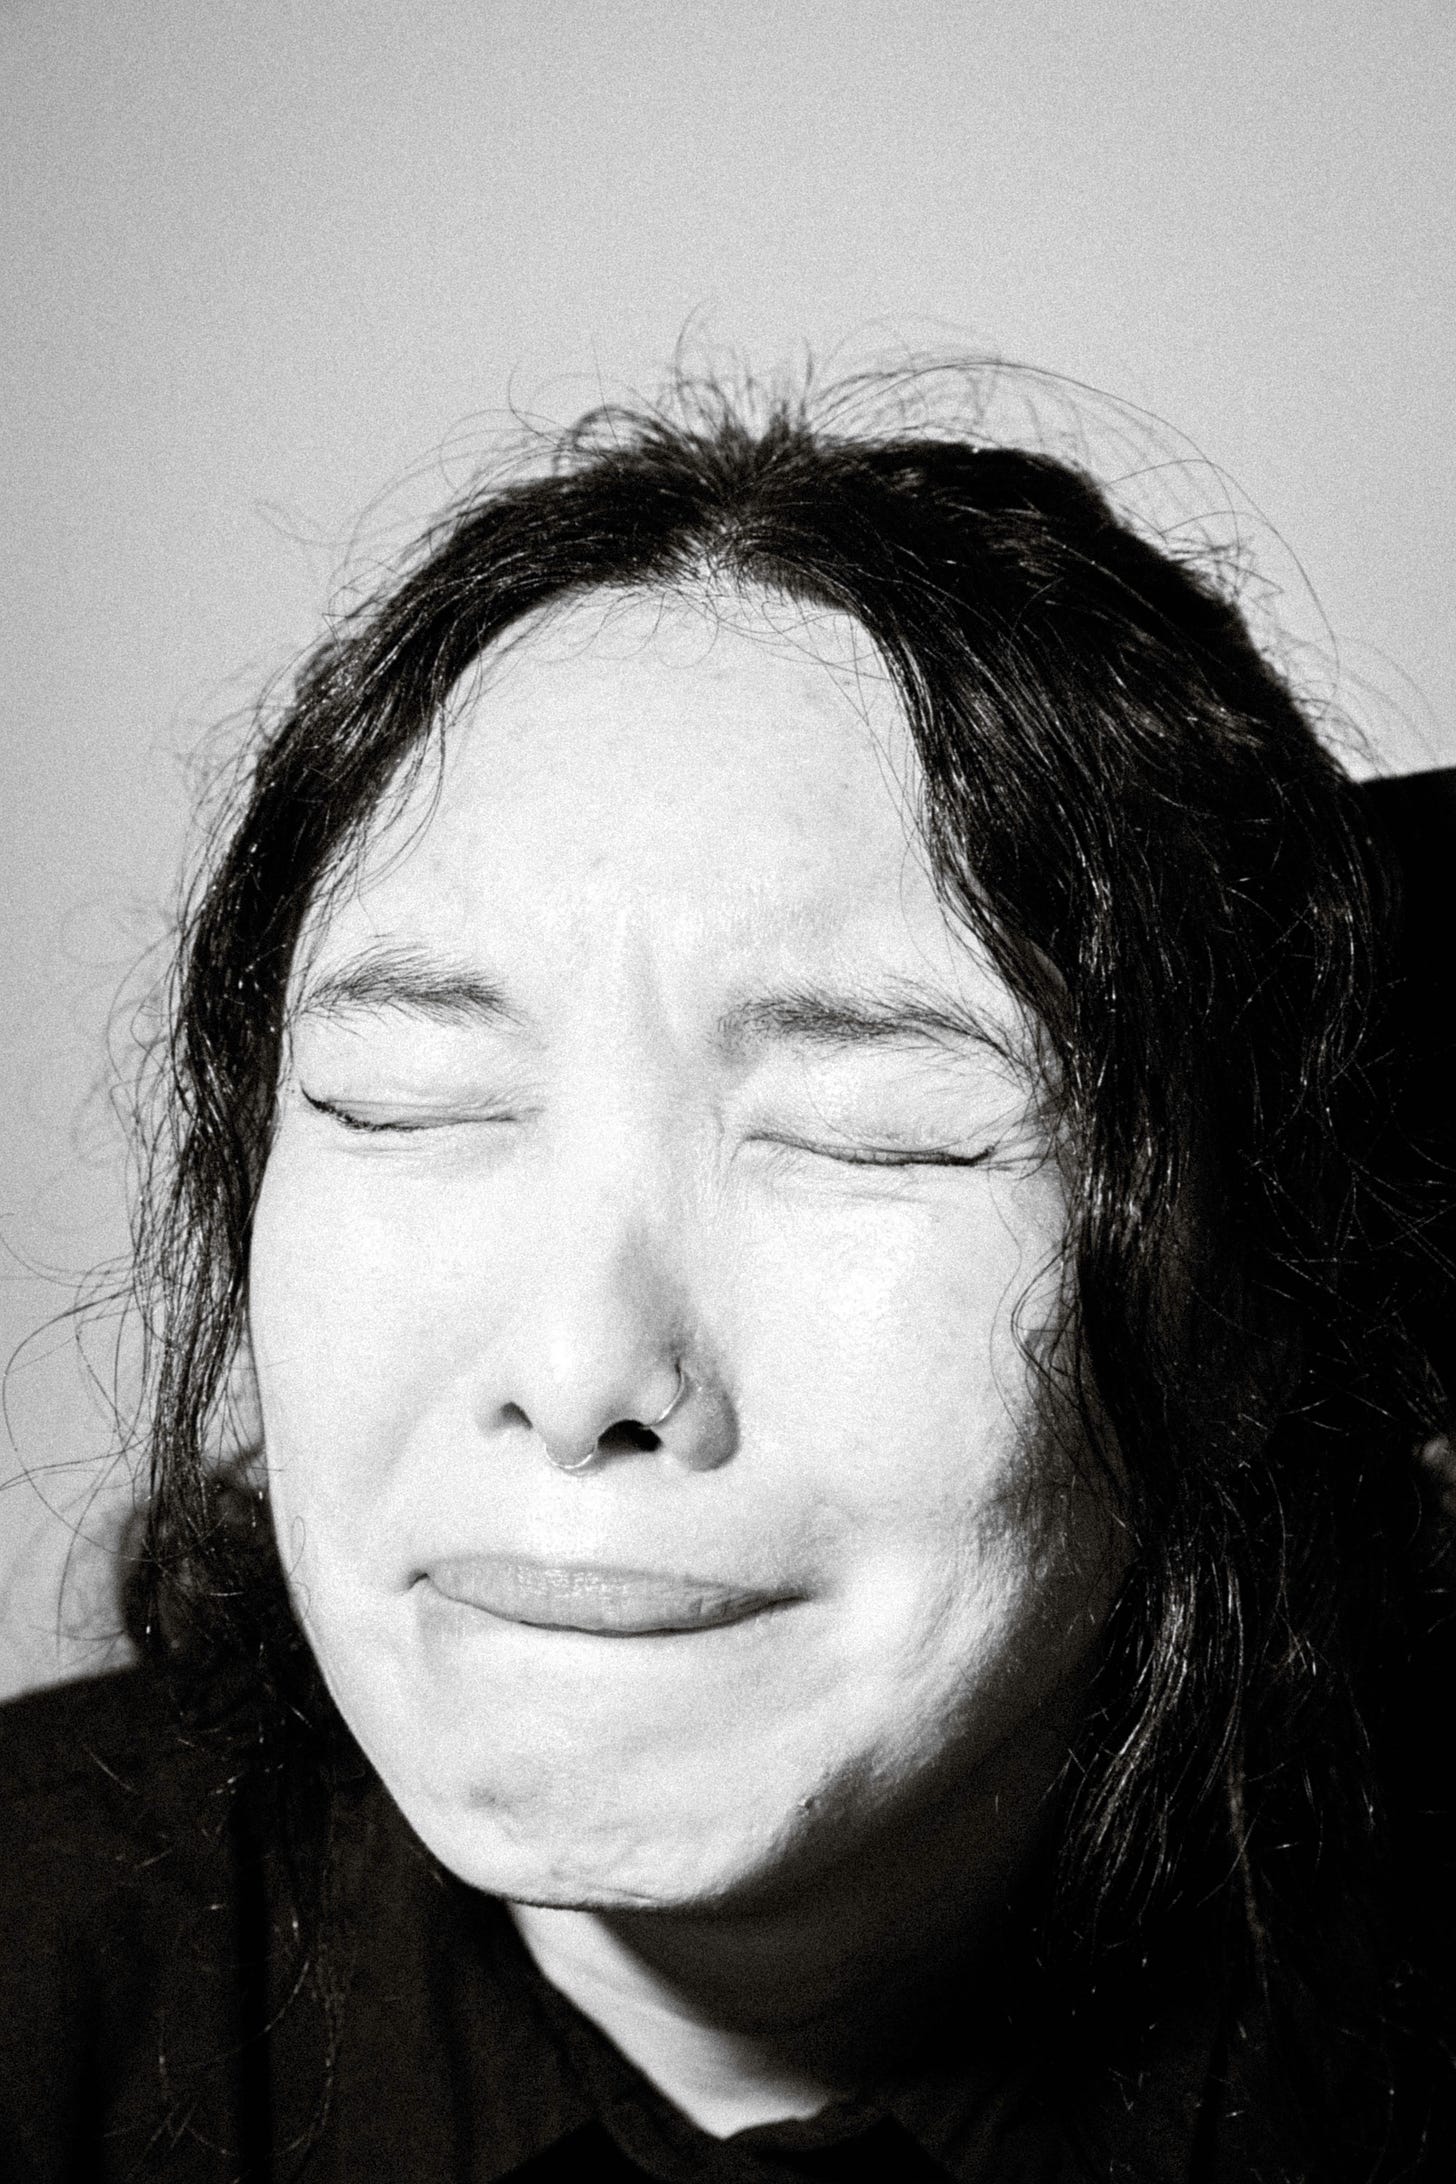 Woman with black hair crying